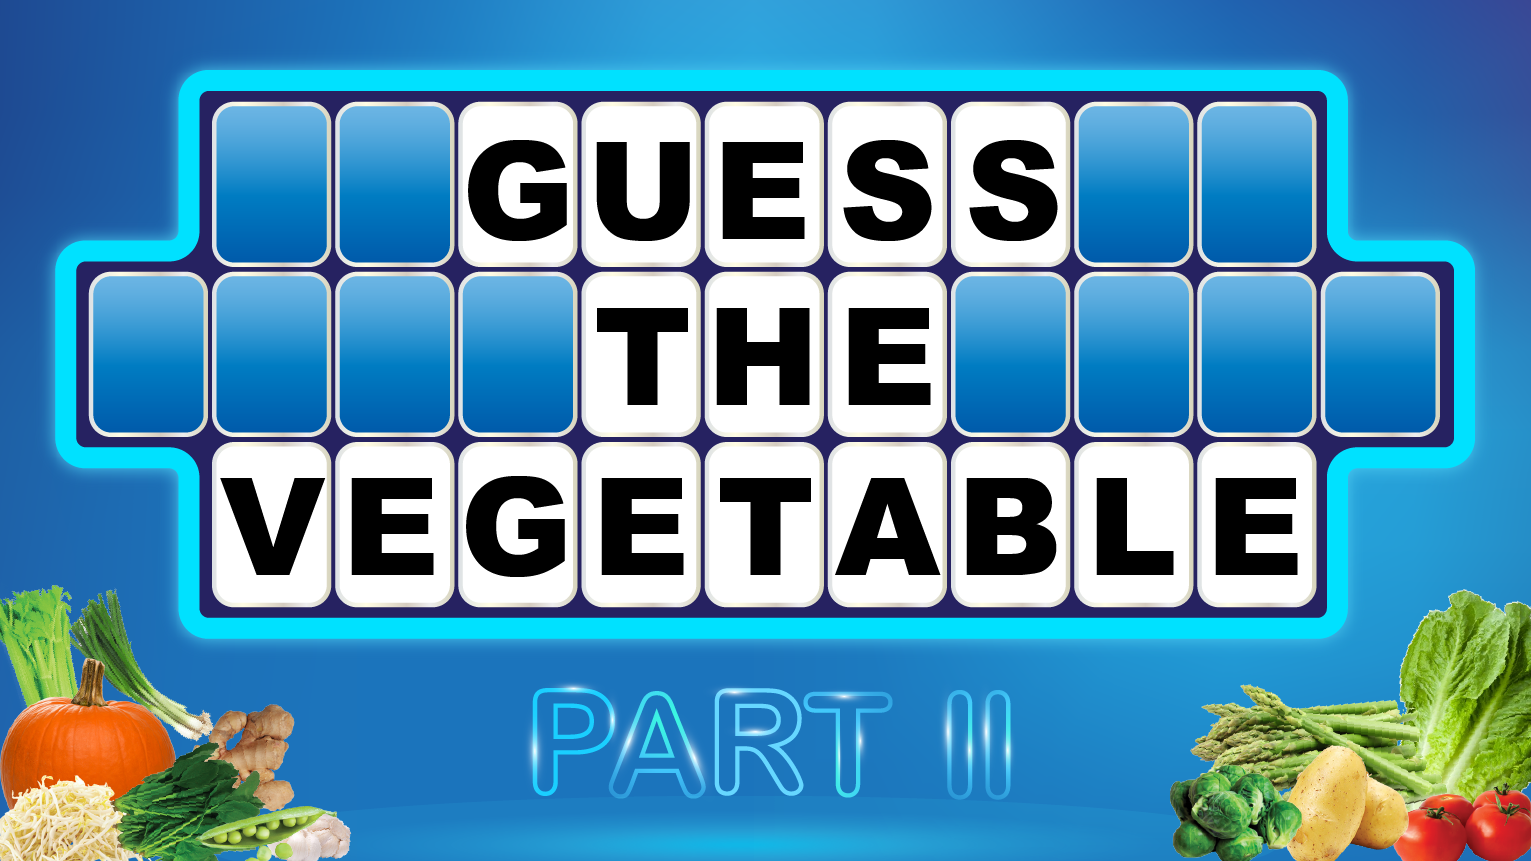 Word Guessing Game - Guess the Vegetable - Part 2